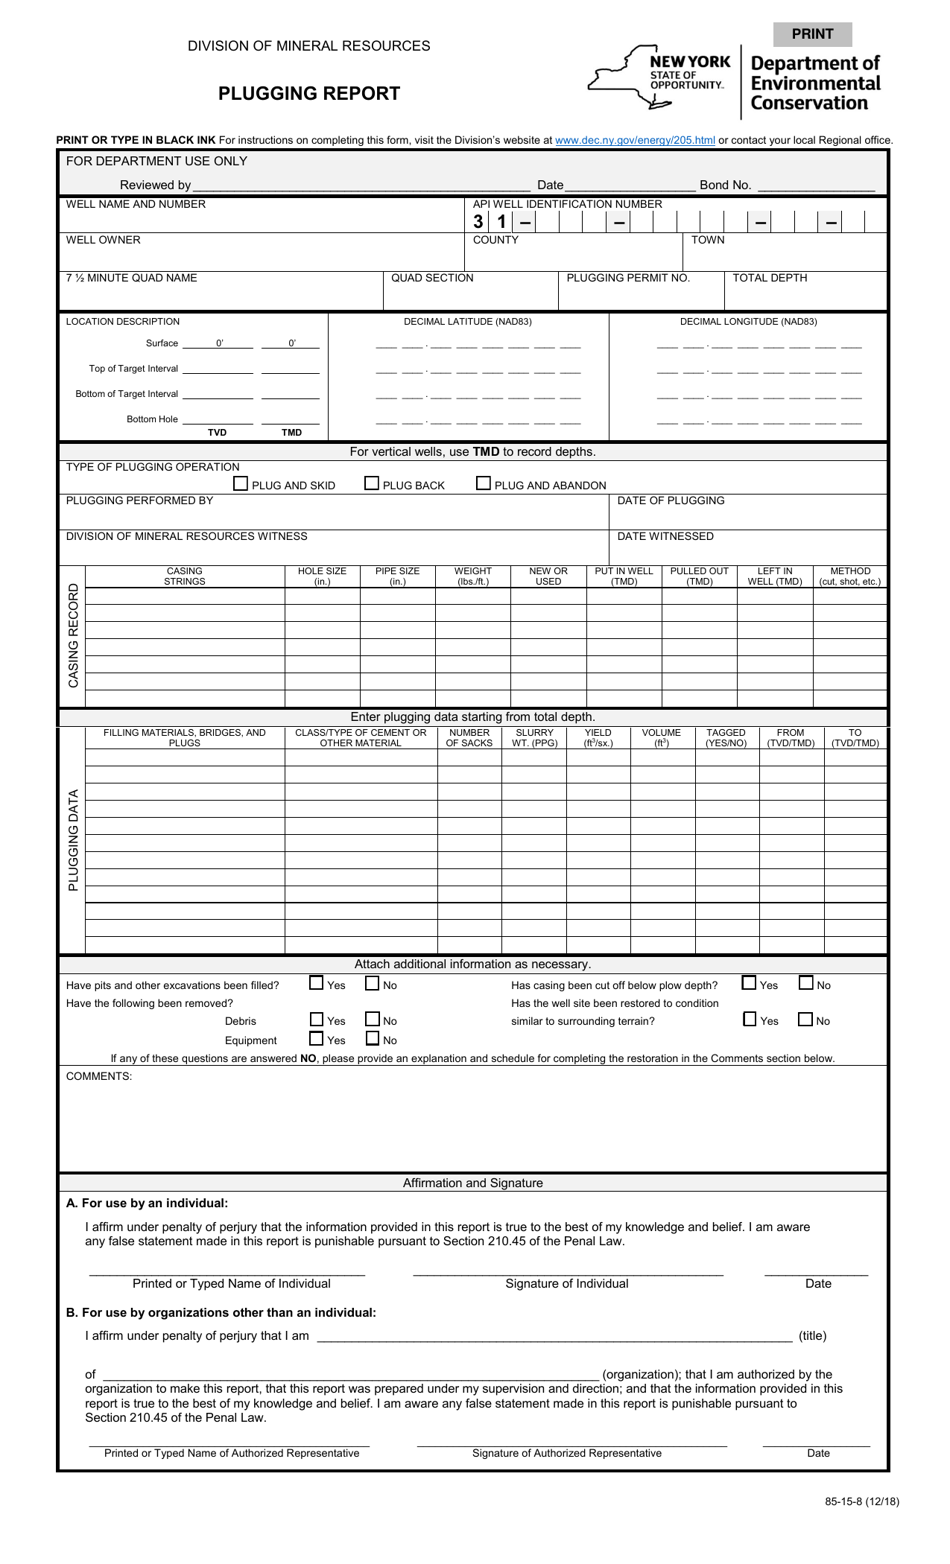 Form 85-15-8 Plugging Report - New York, Page 1